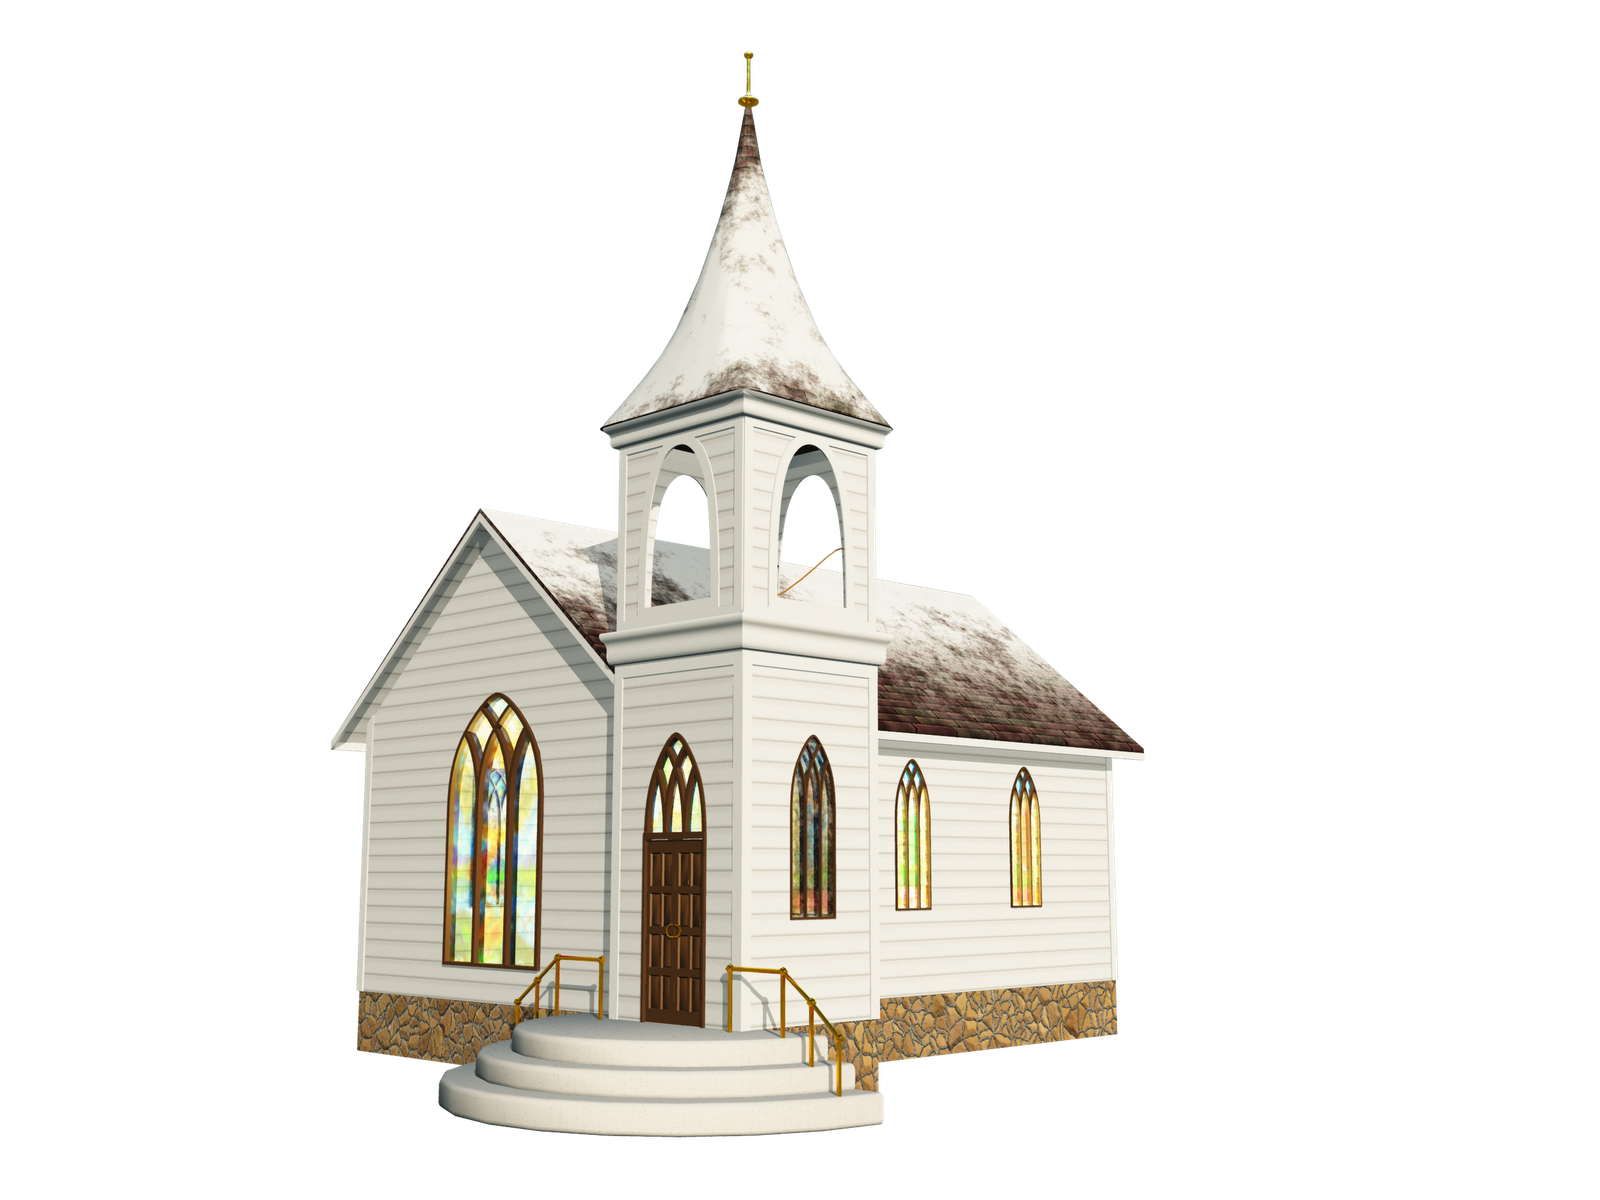 Church File Formats Free Transparent Image HD Clipart